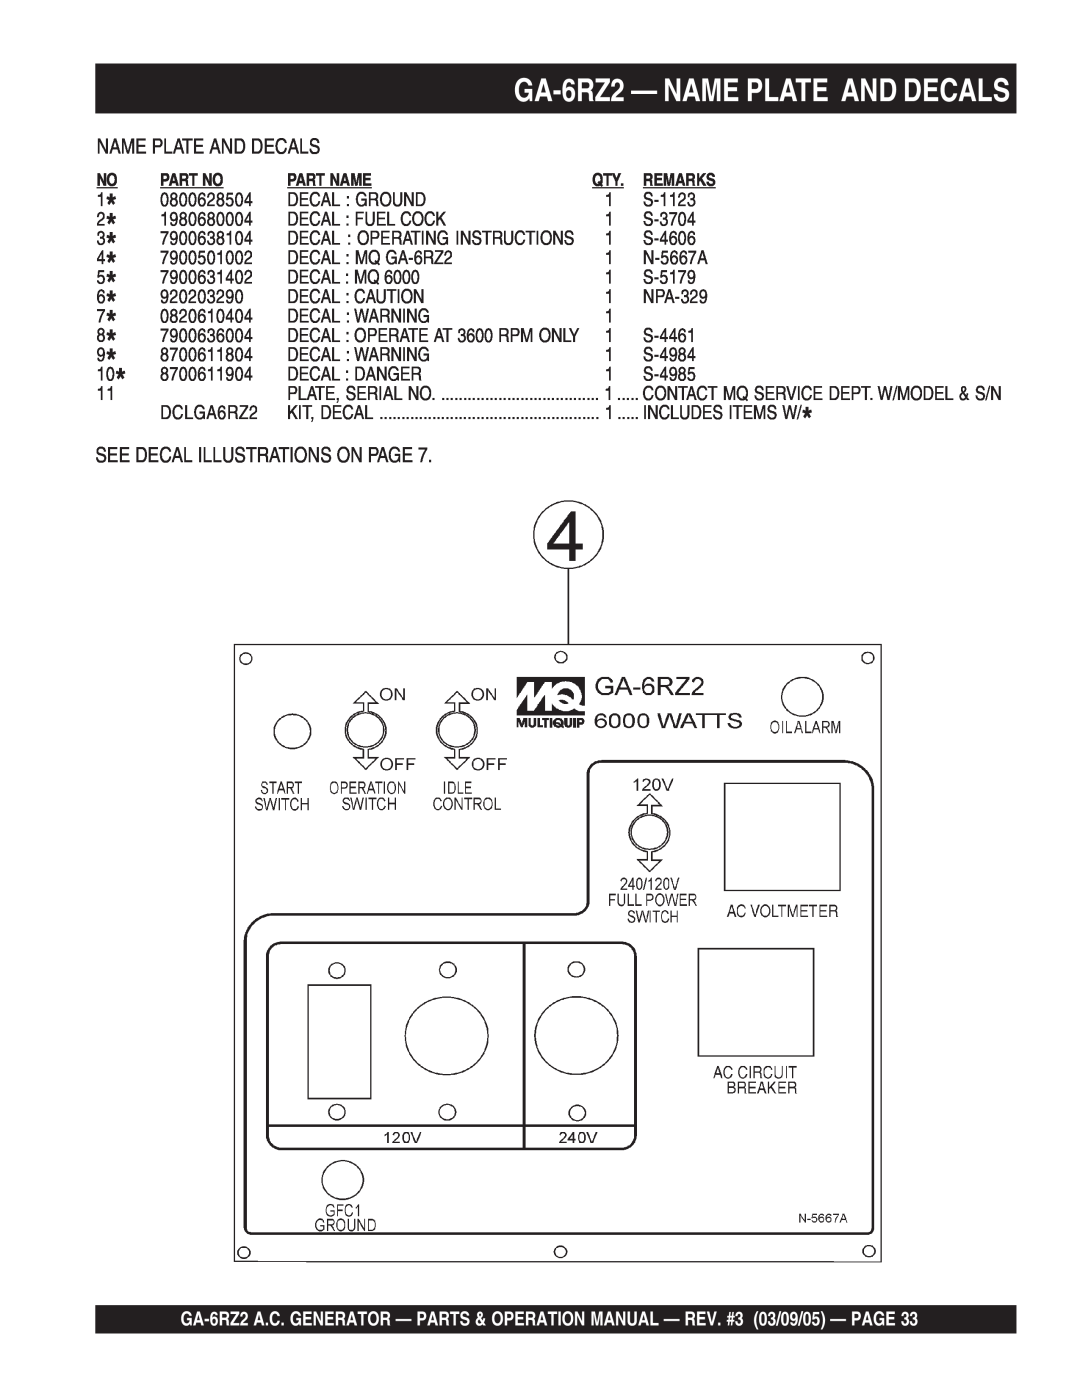 Multiquip operation manual GA-6RZ2- NAME PLATE AND DECALS, Name Plate And Decals, See Decal Illustrations On Page 